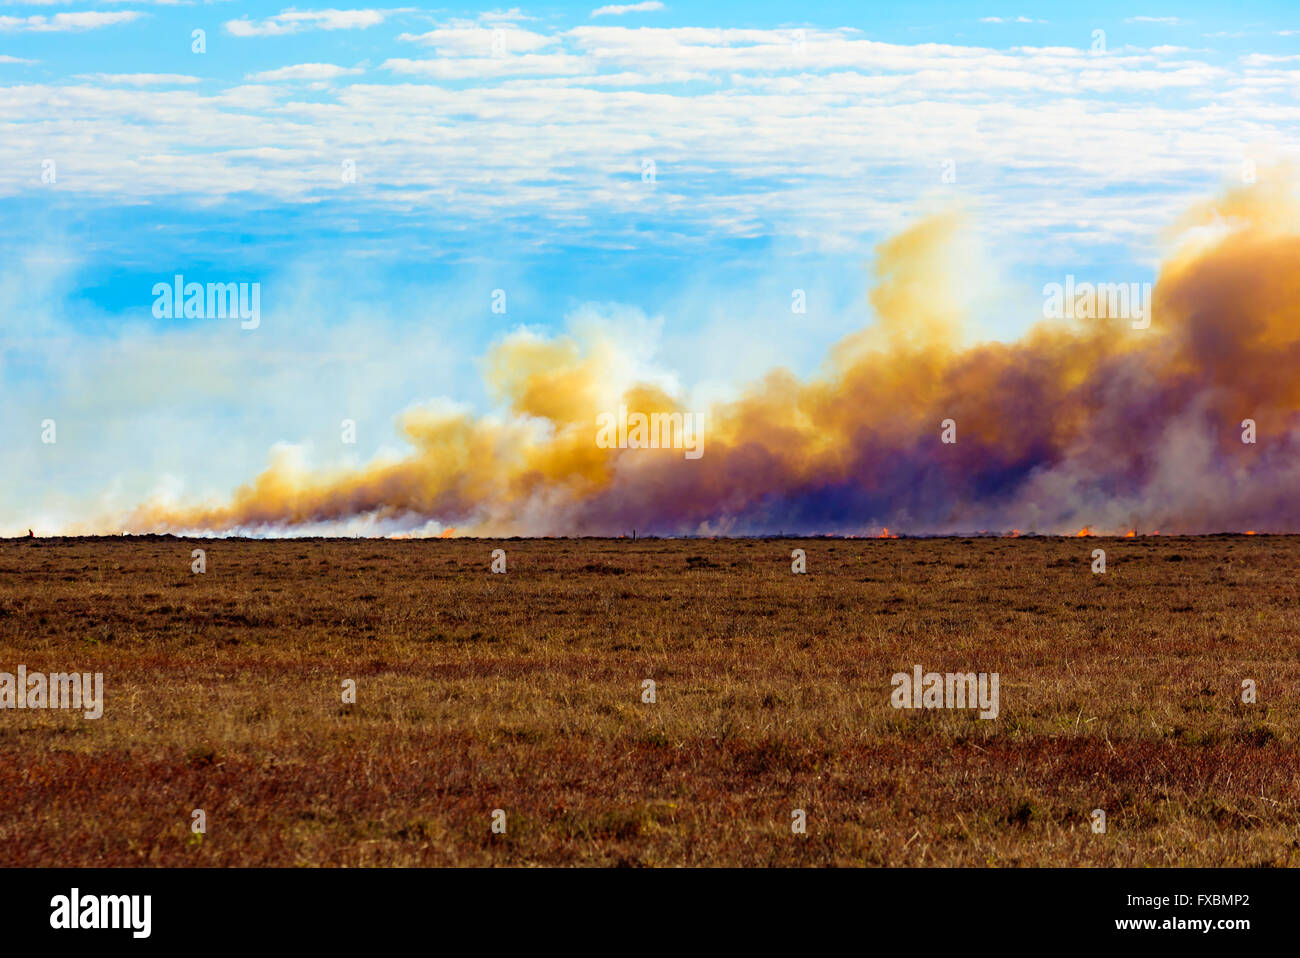 The deliberate and controlled burning of heather on a moor. The rising smoke is chokingly dense and yellow, mixed with white wat Stock Photo